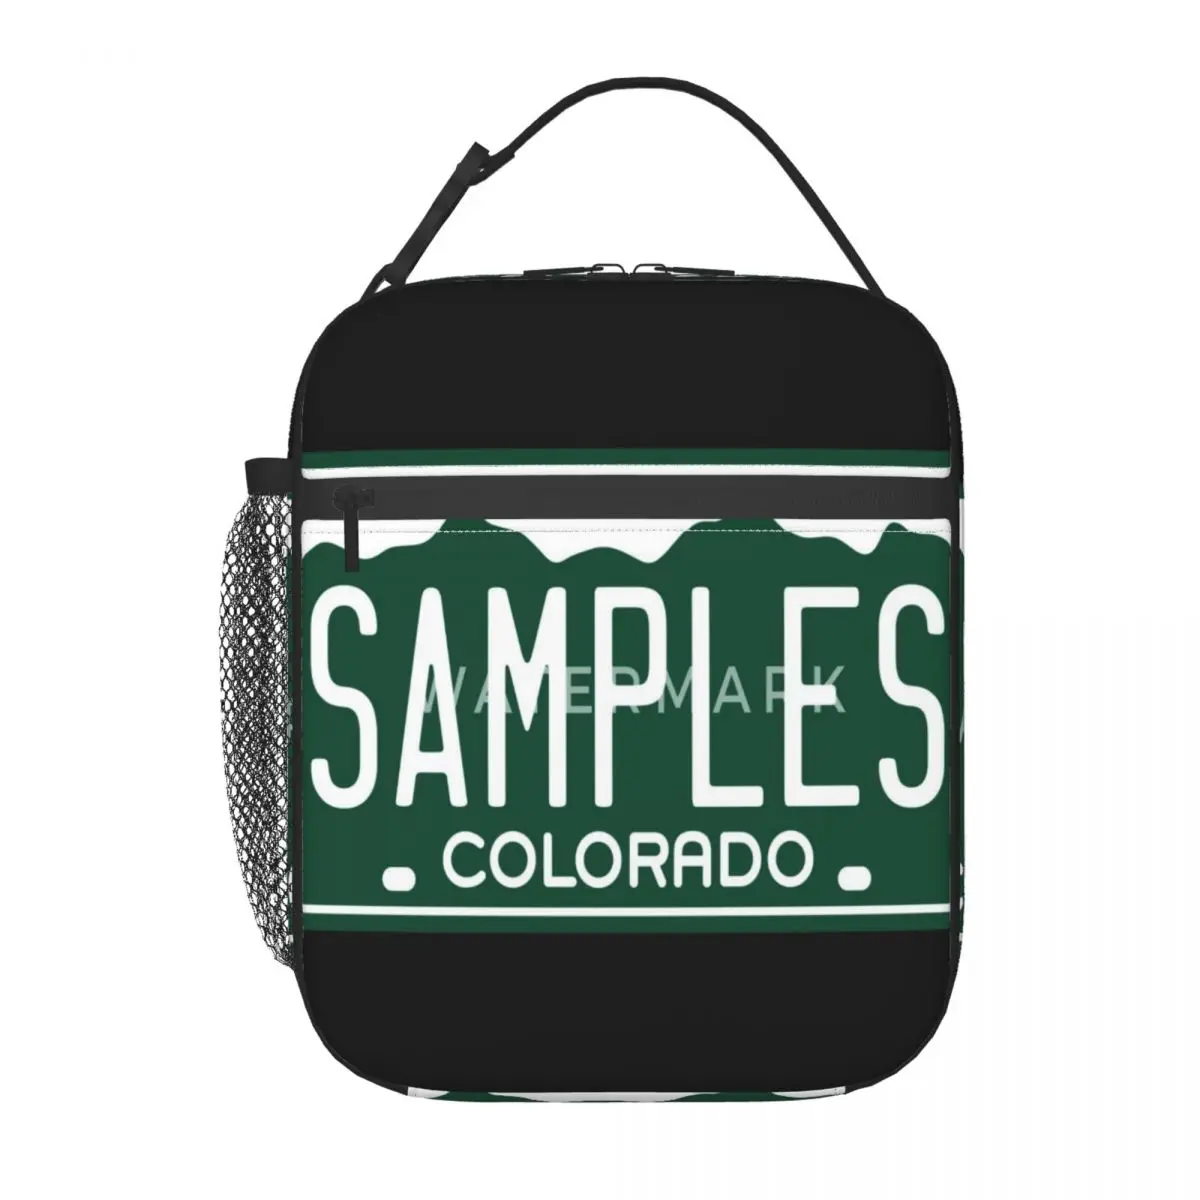 

The Samples Insulated Lunch Bag Popular Oxford Cloth Travel Insulated Lunch Bag Customizable